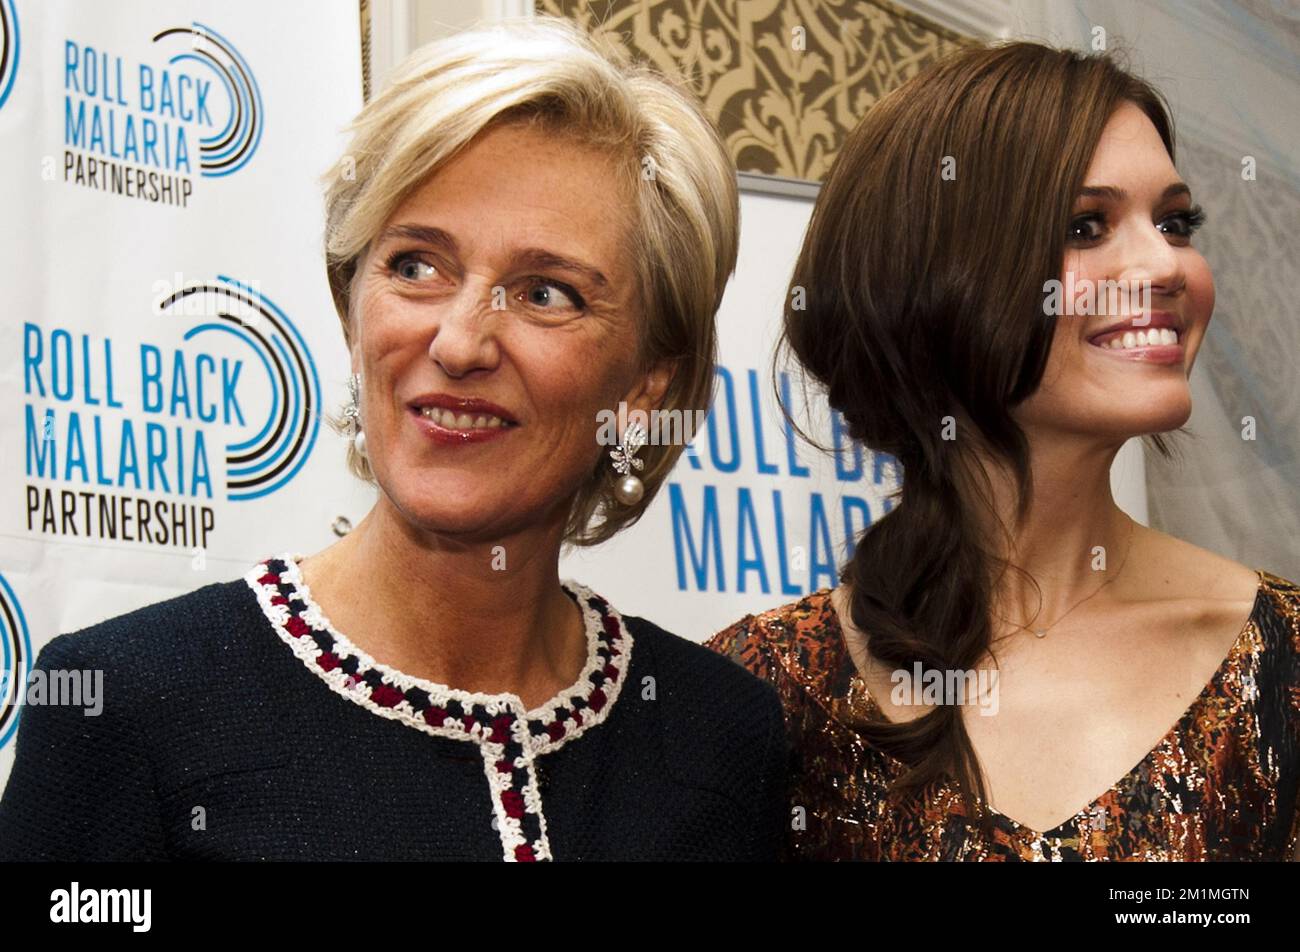 20110920 - NEW YORK, UNITED STATES: Princess Astrid of Belgium, Special Representative of the Roll Back Malaria Partnership, and Mandy Moore, Actress, Singer and PSI Ambassador, pictured during a reception to celebrate the UN decade to the Roll Back Malaria partnership at the Intercontinental Barclay Hotel, New York, Tuesday 20 September 2011. BELGA PHOTO BENOIT DOPPAGNE Stock Photo